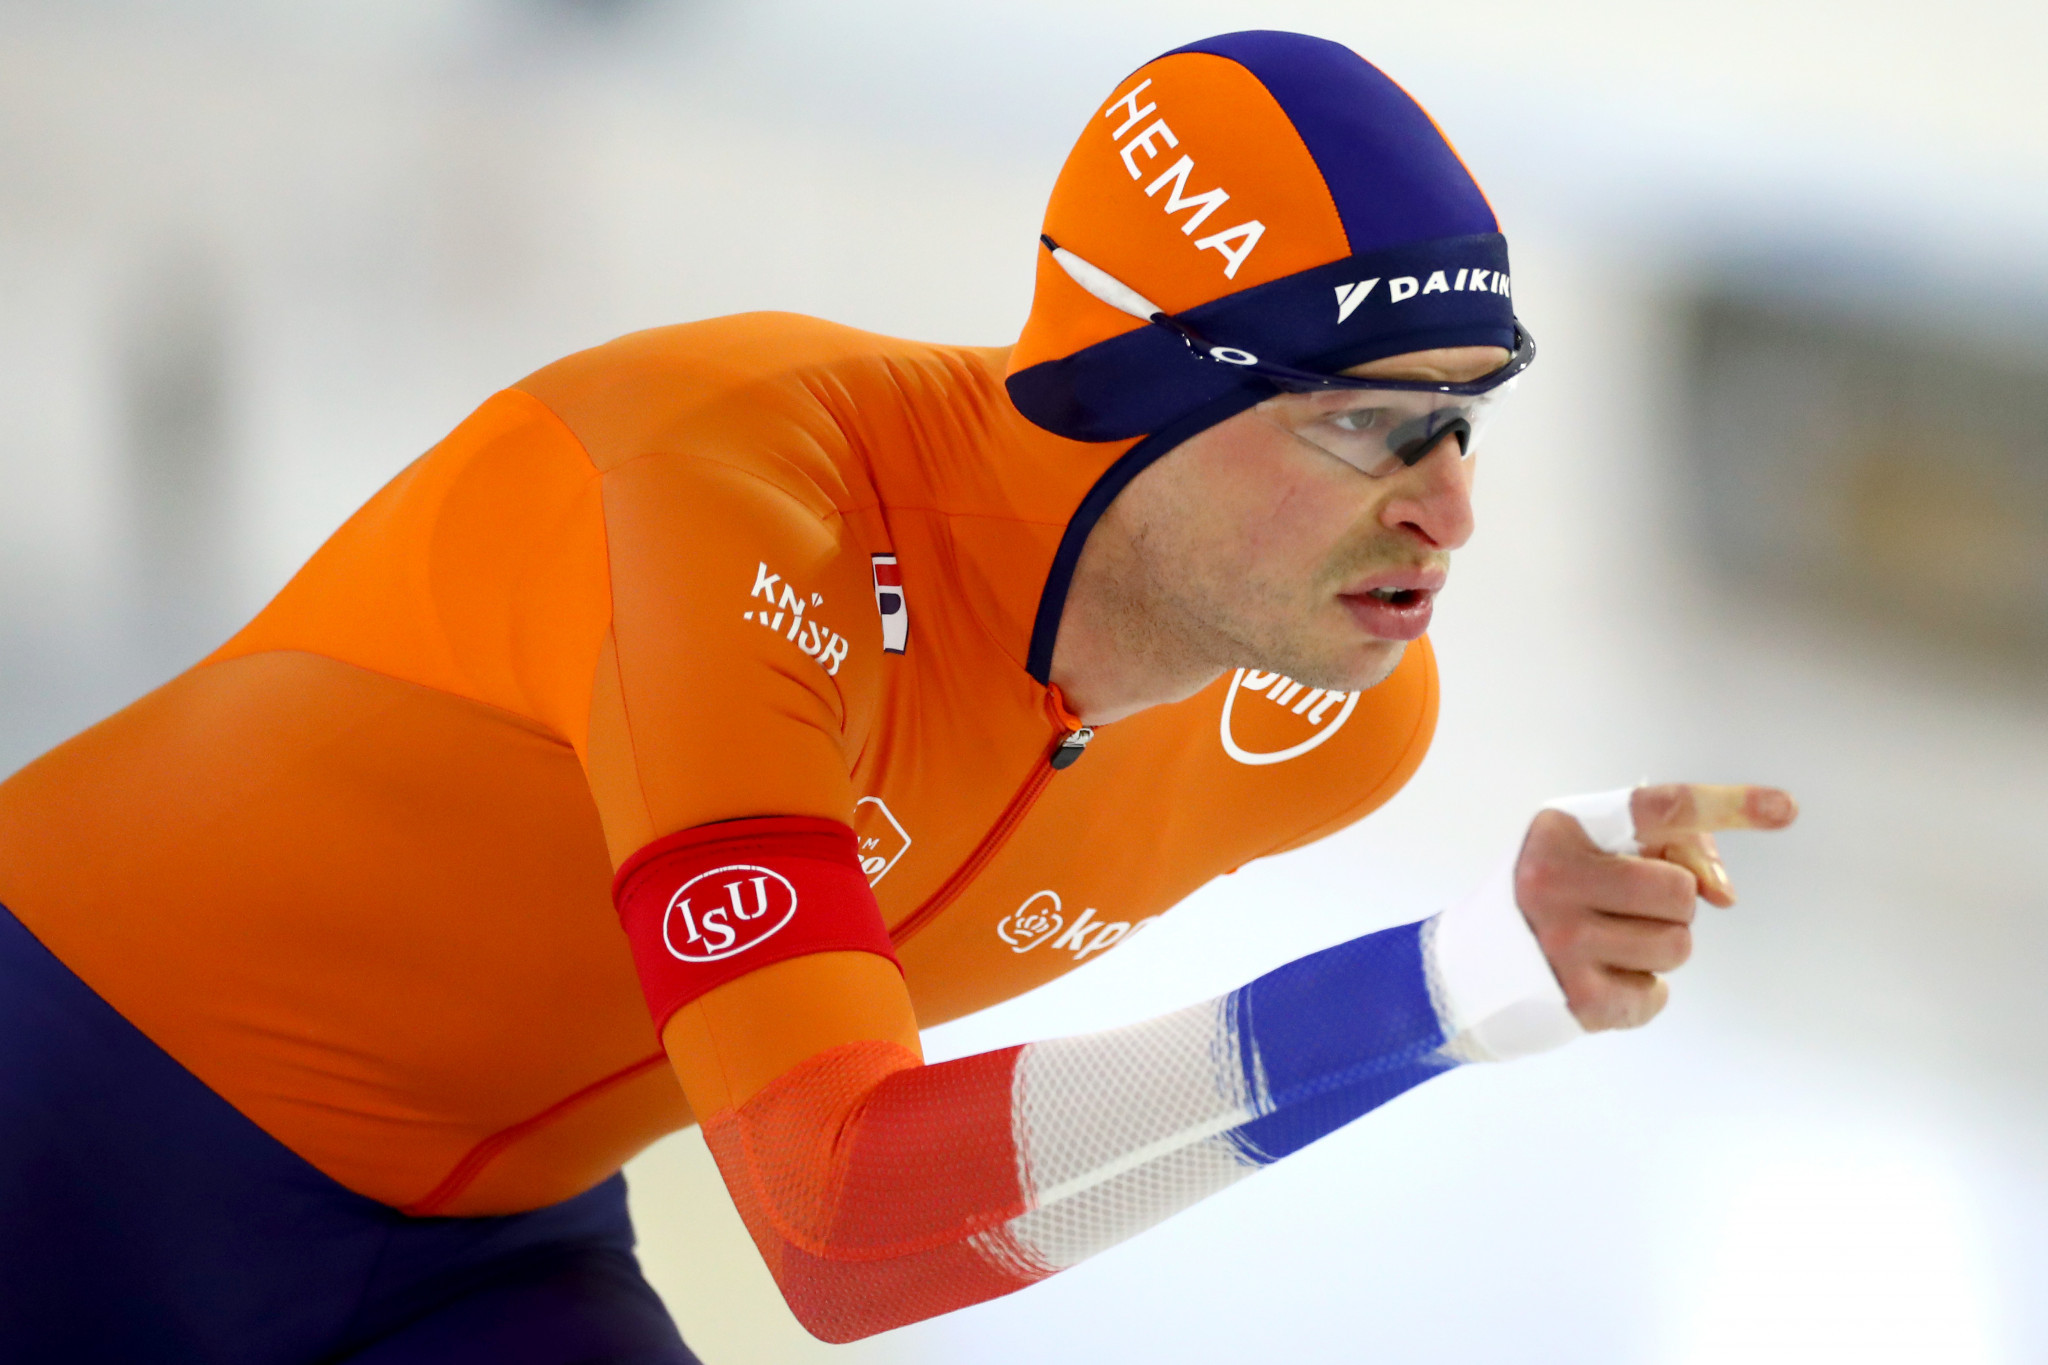 Sven Kramer is competing for only the second time this season in Calgary ©Getty Images